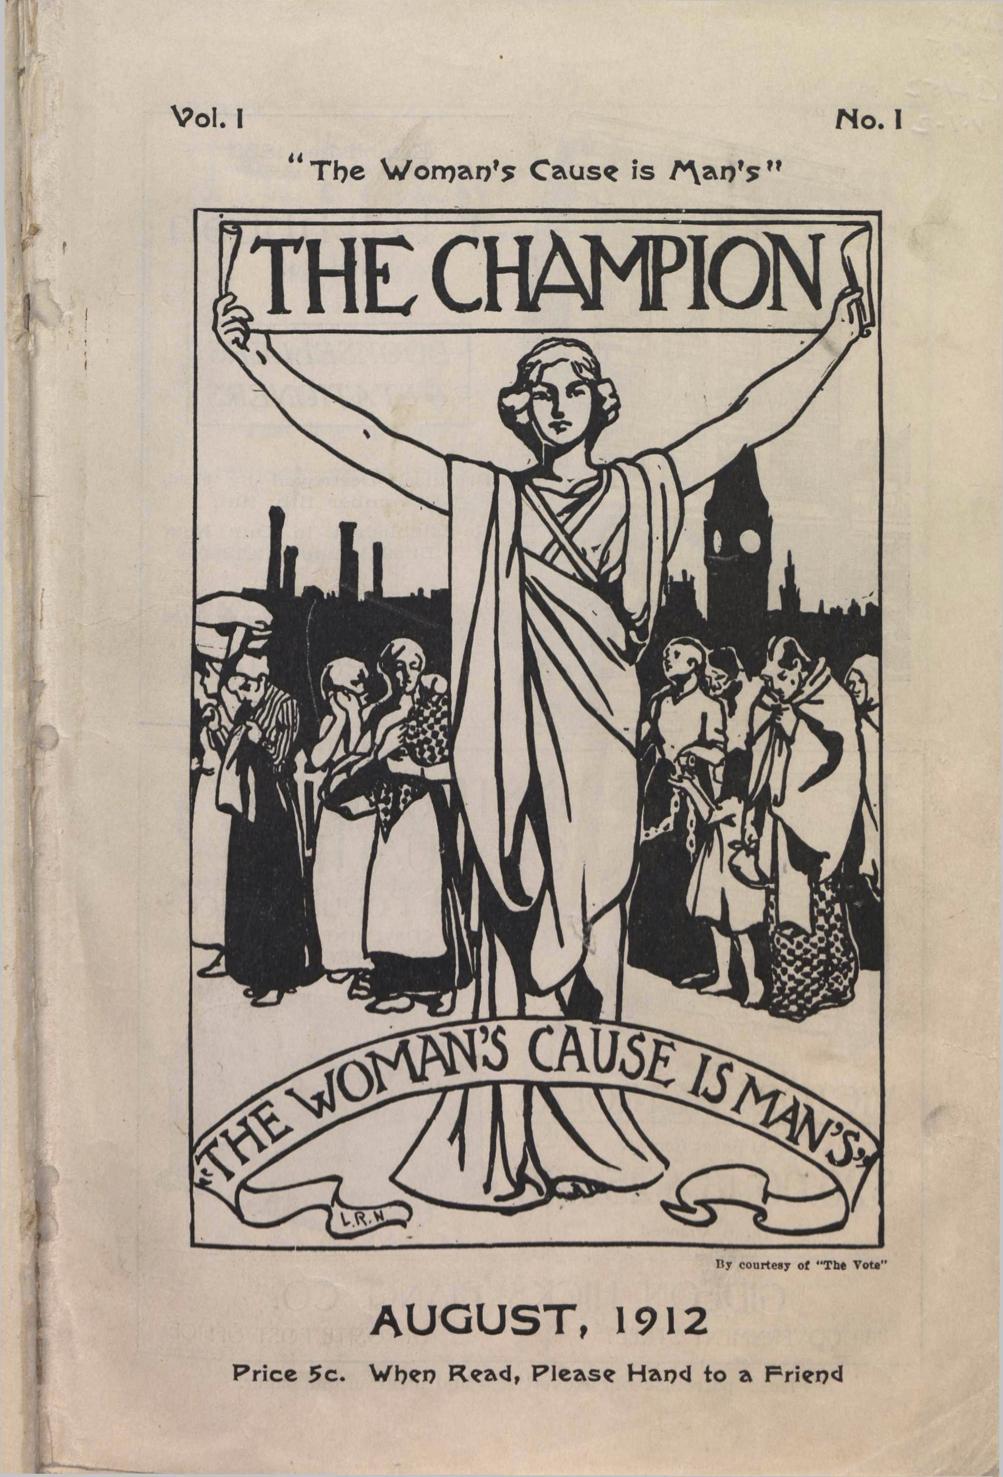 Front page of the first issue of “The Champion”